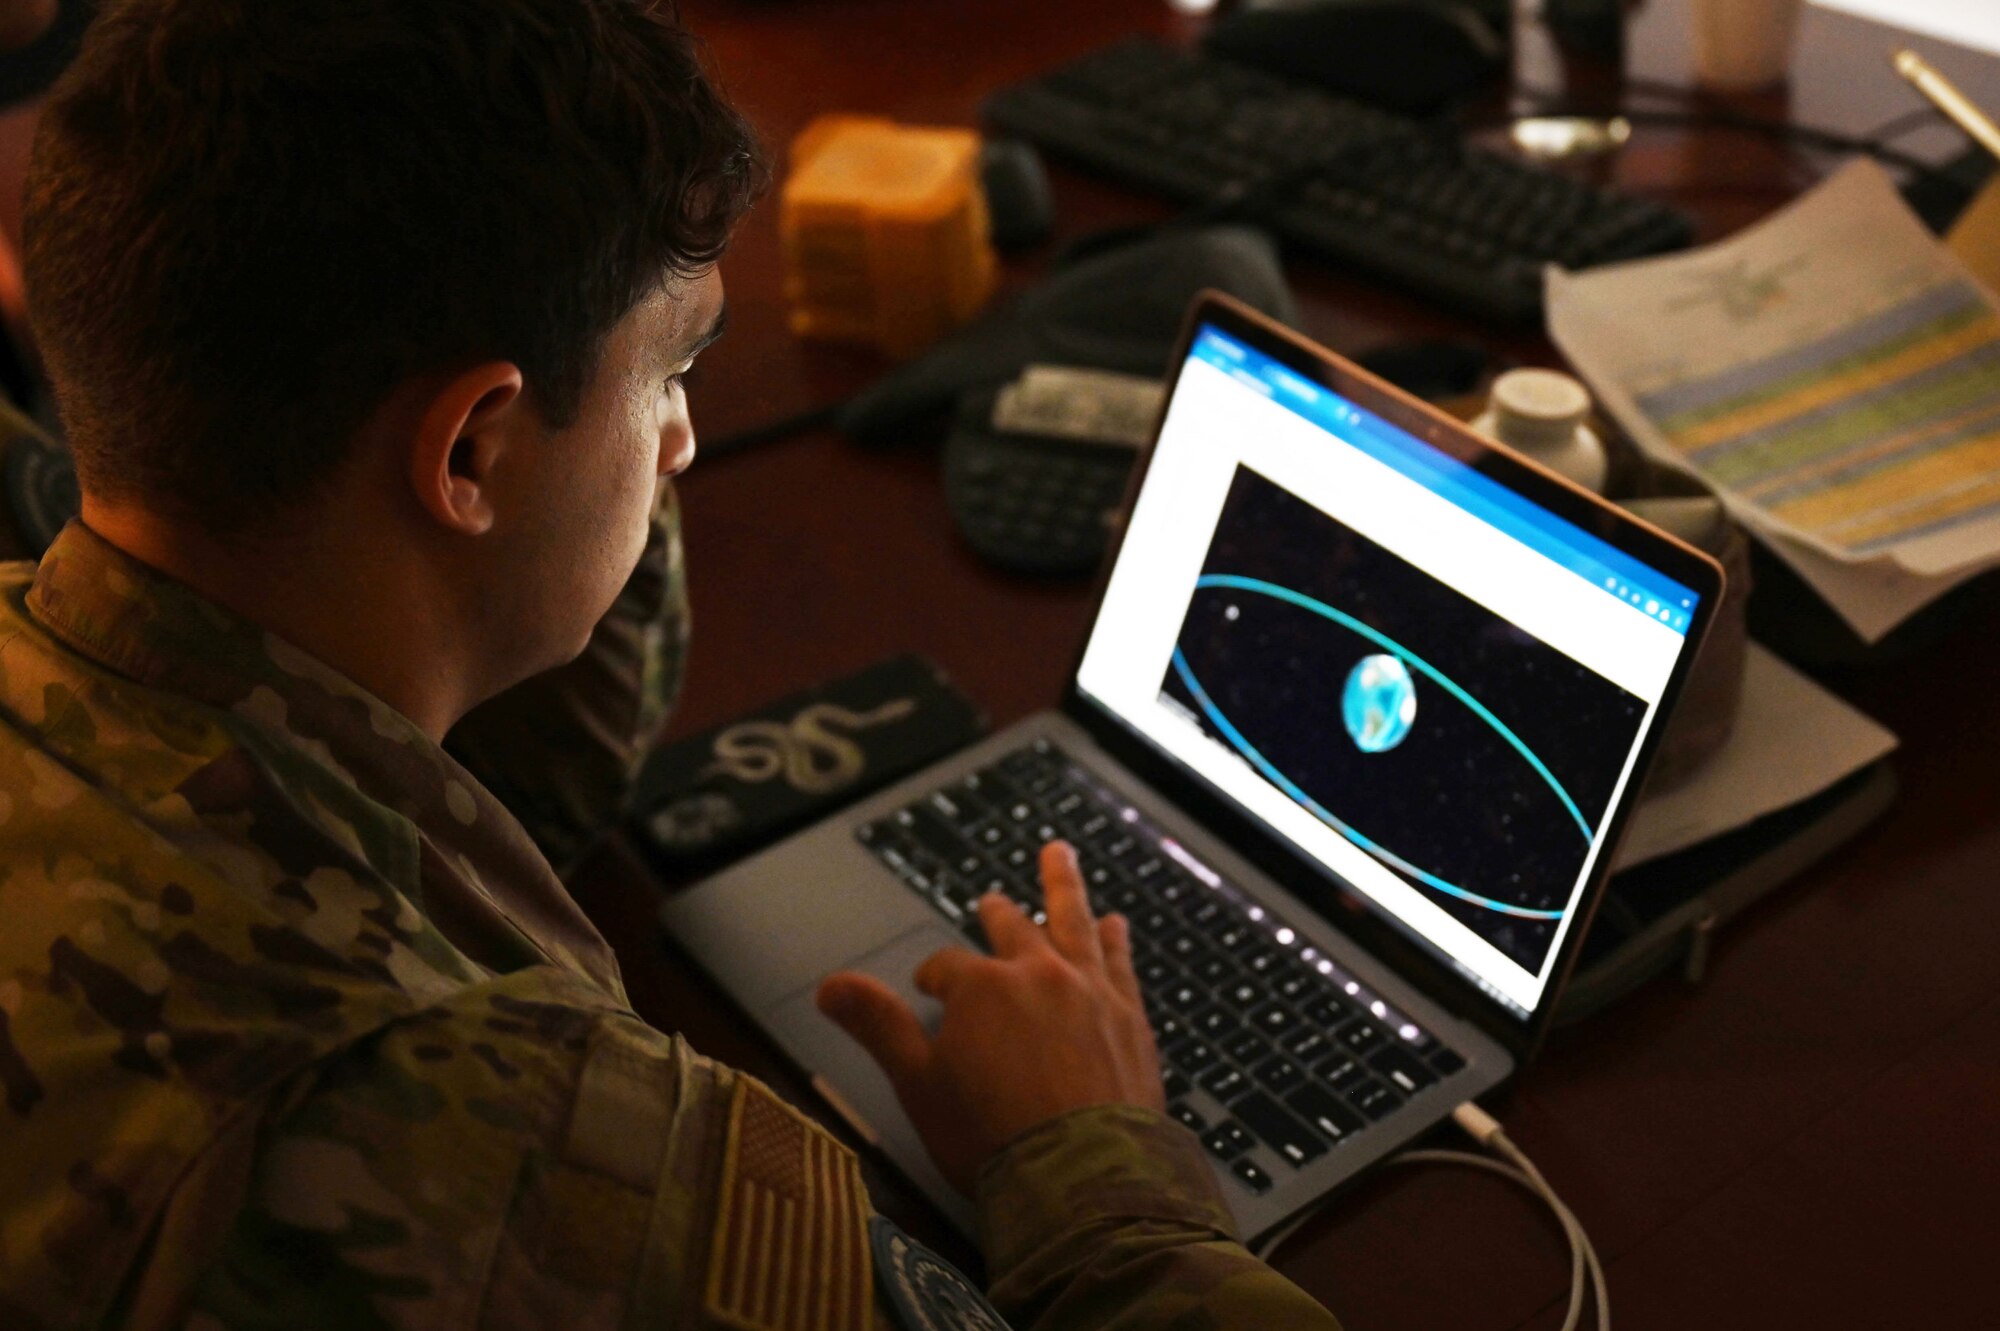 Senior Airman Capostagno looks through information on his laptop during the Vulcon Guard Bolt 5 exercise